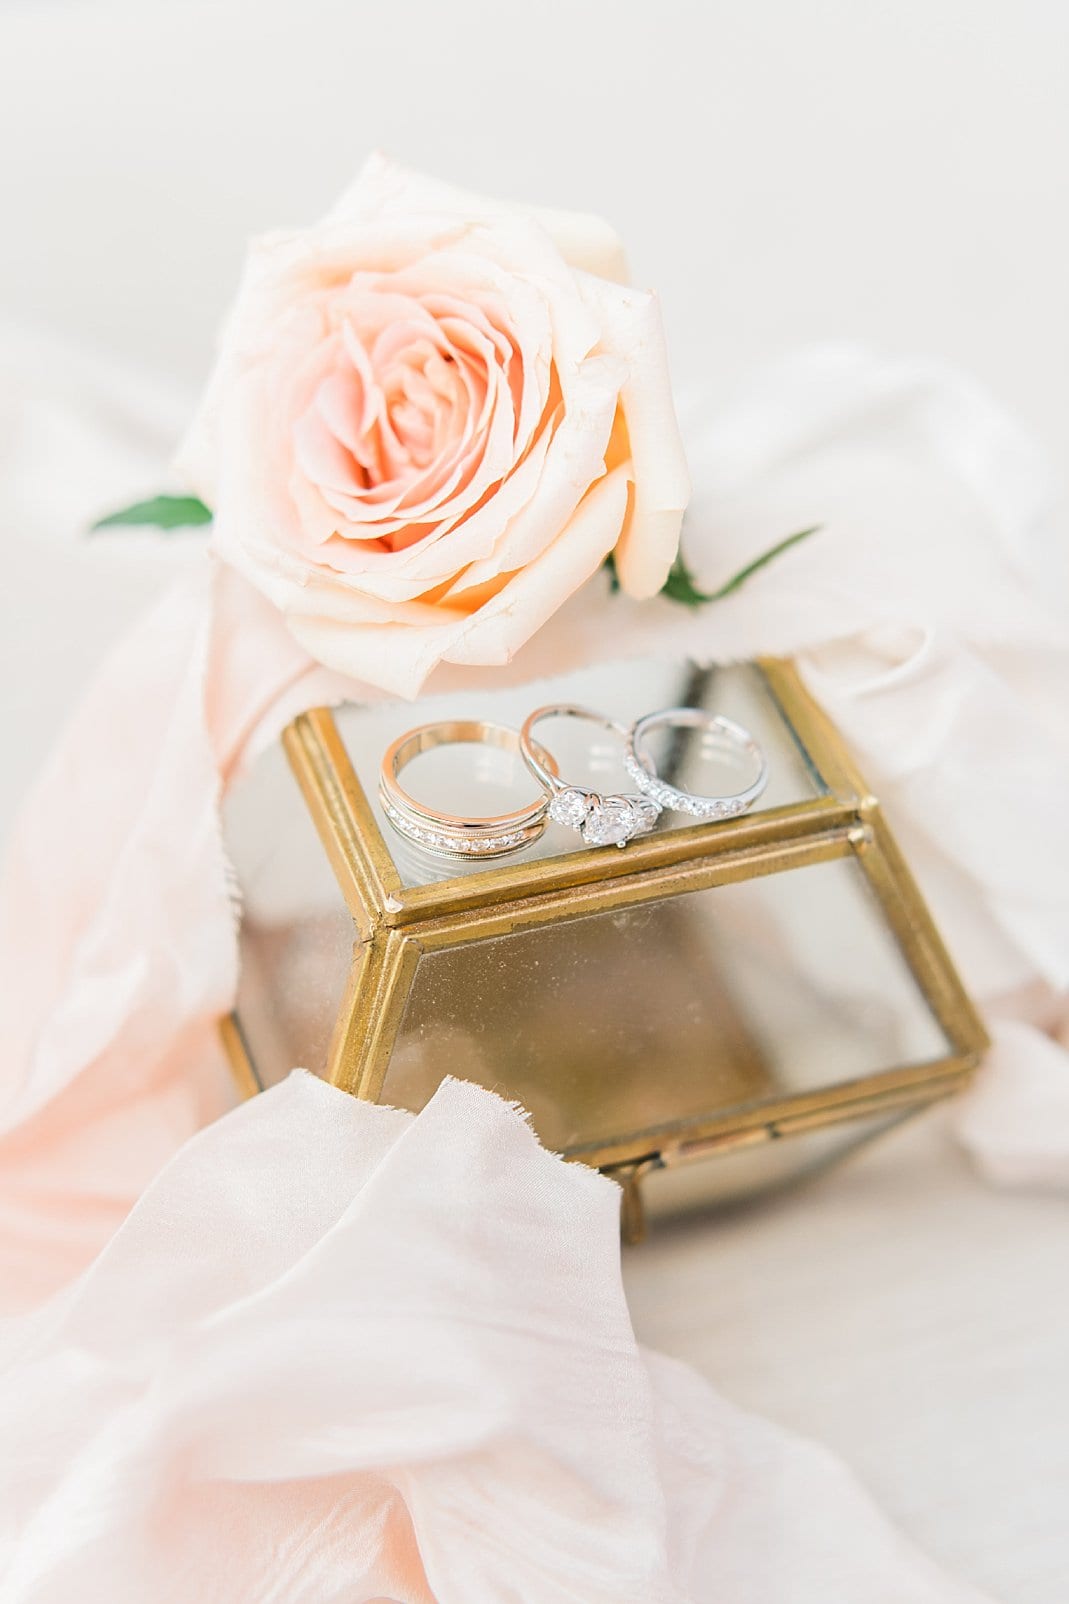 chapel hill, nc bride and groom rings on gold rimmed glass jewelry box photo